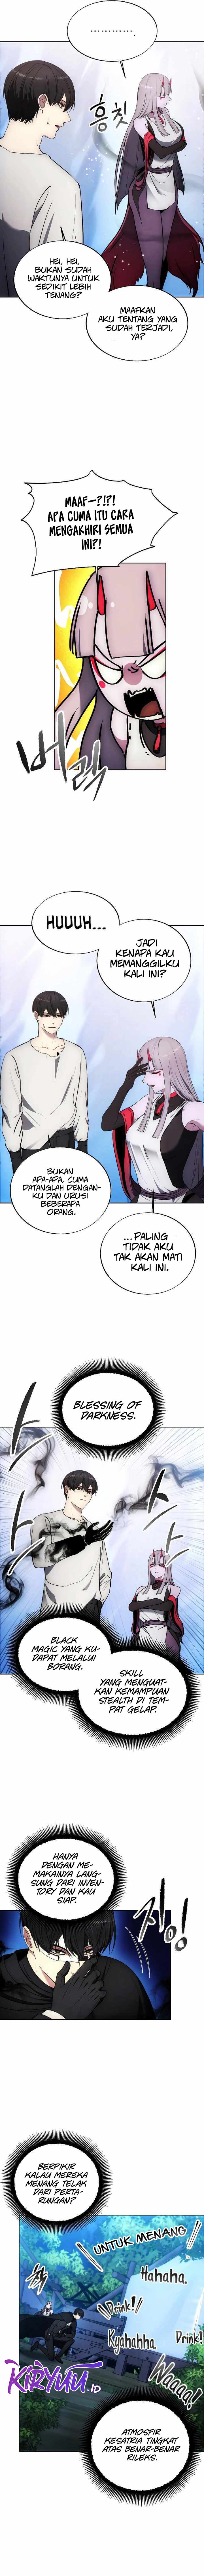 How To Live As A Villain Chapter 123